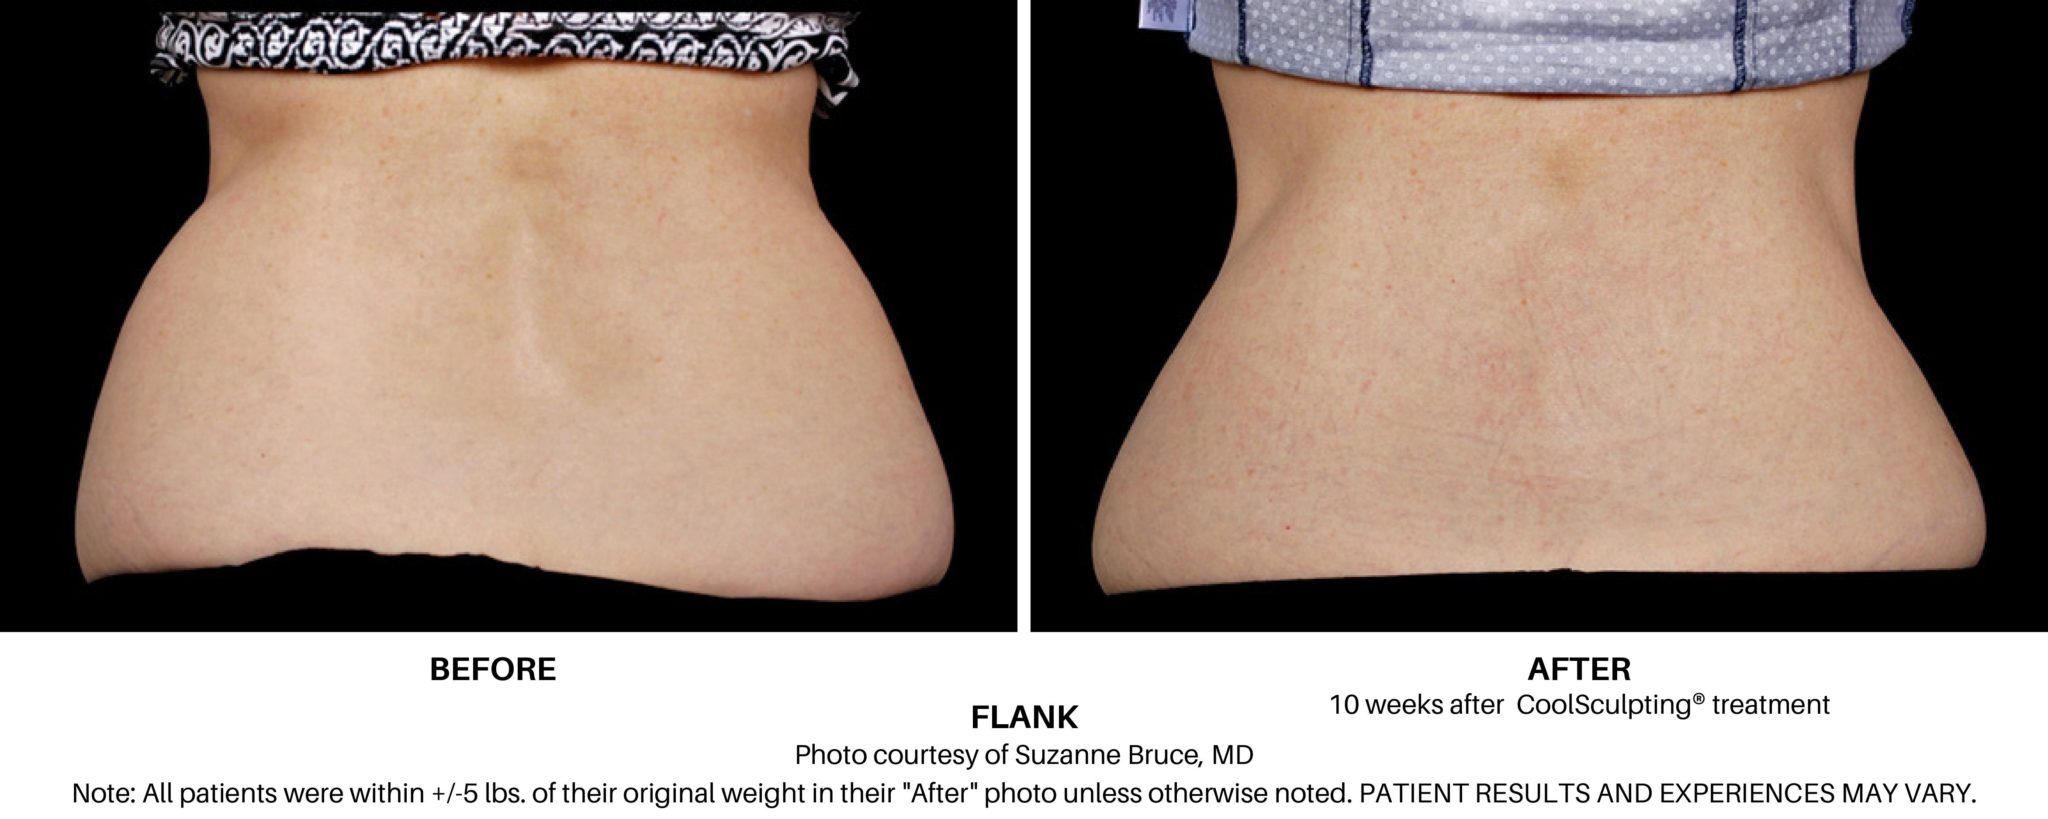 Excessive flank fat - too big flanks